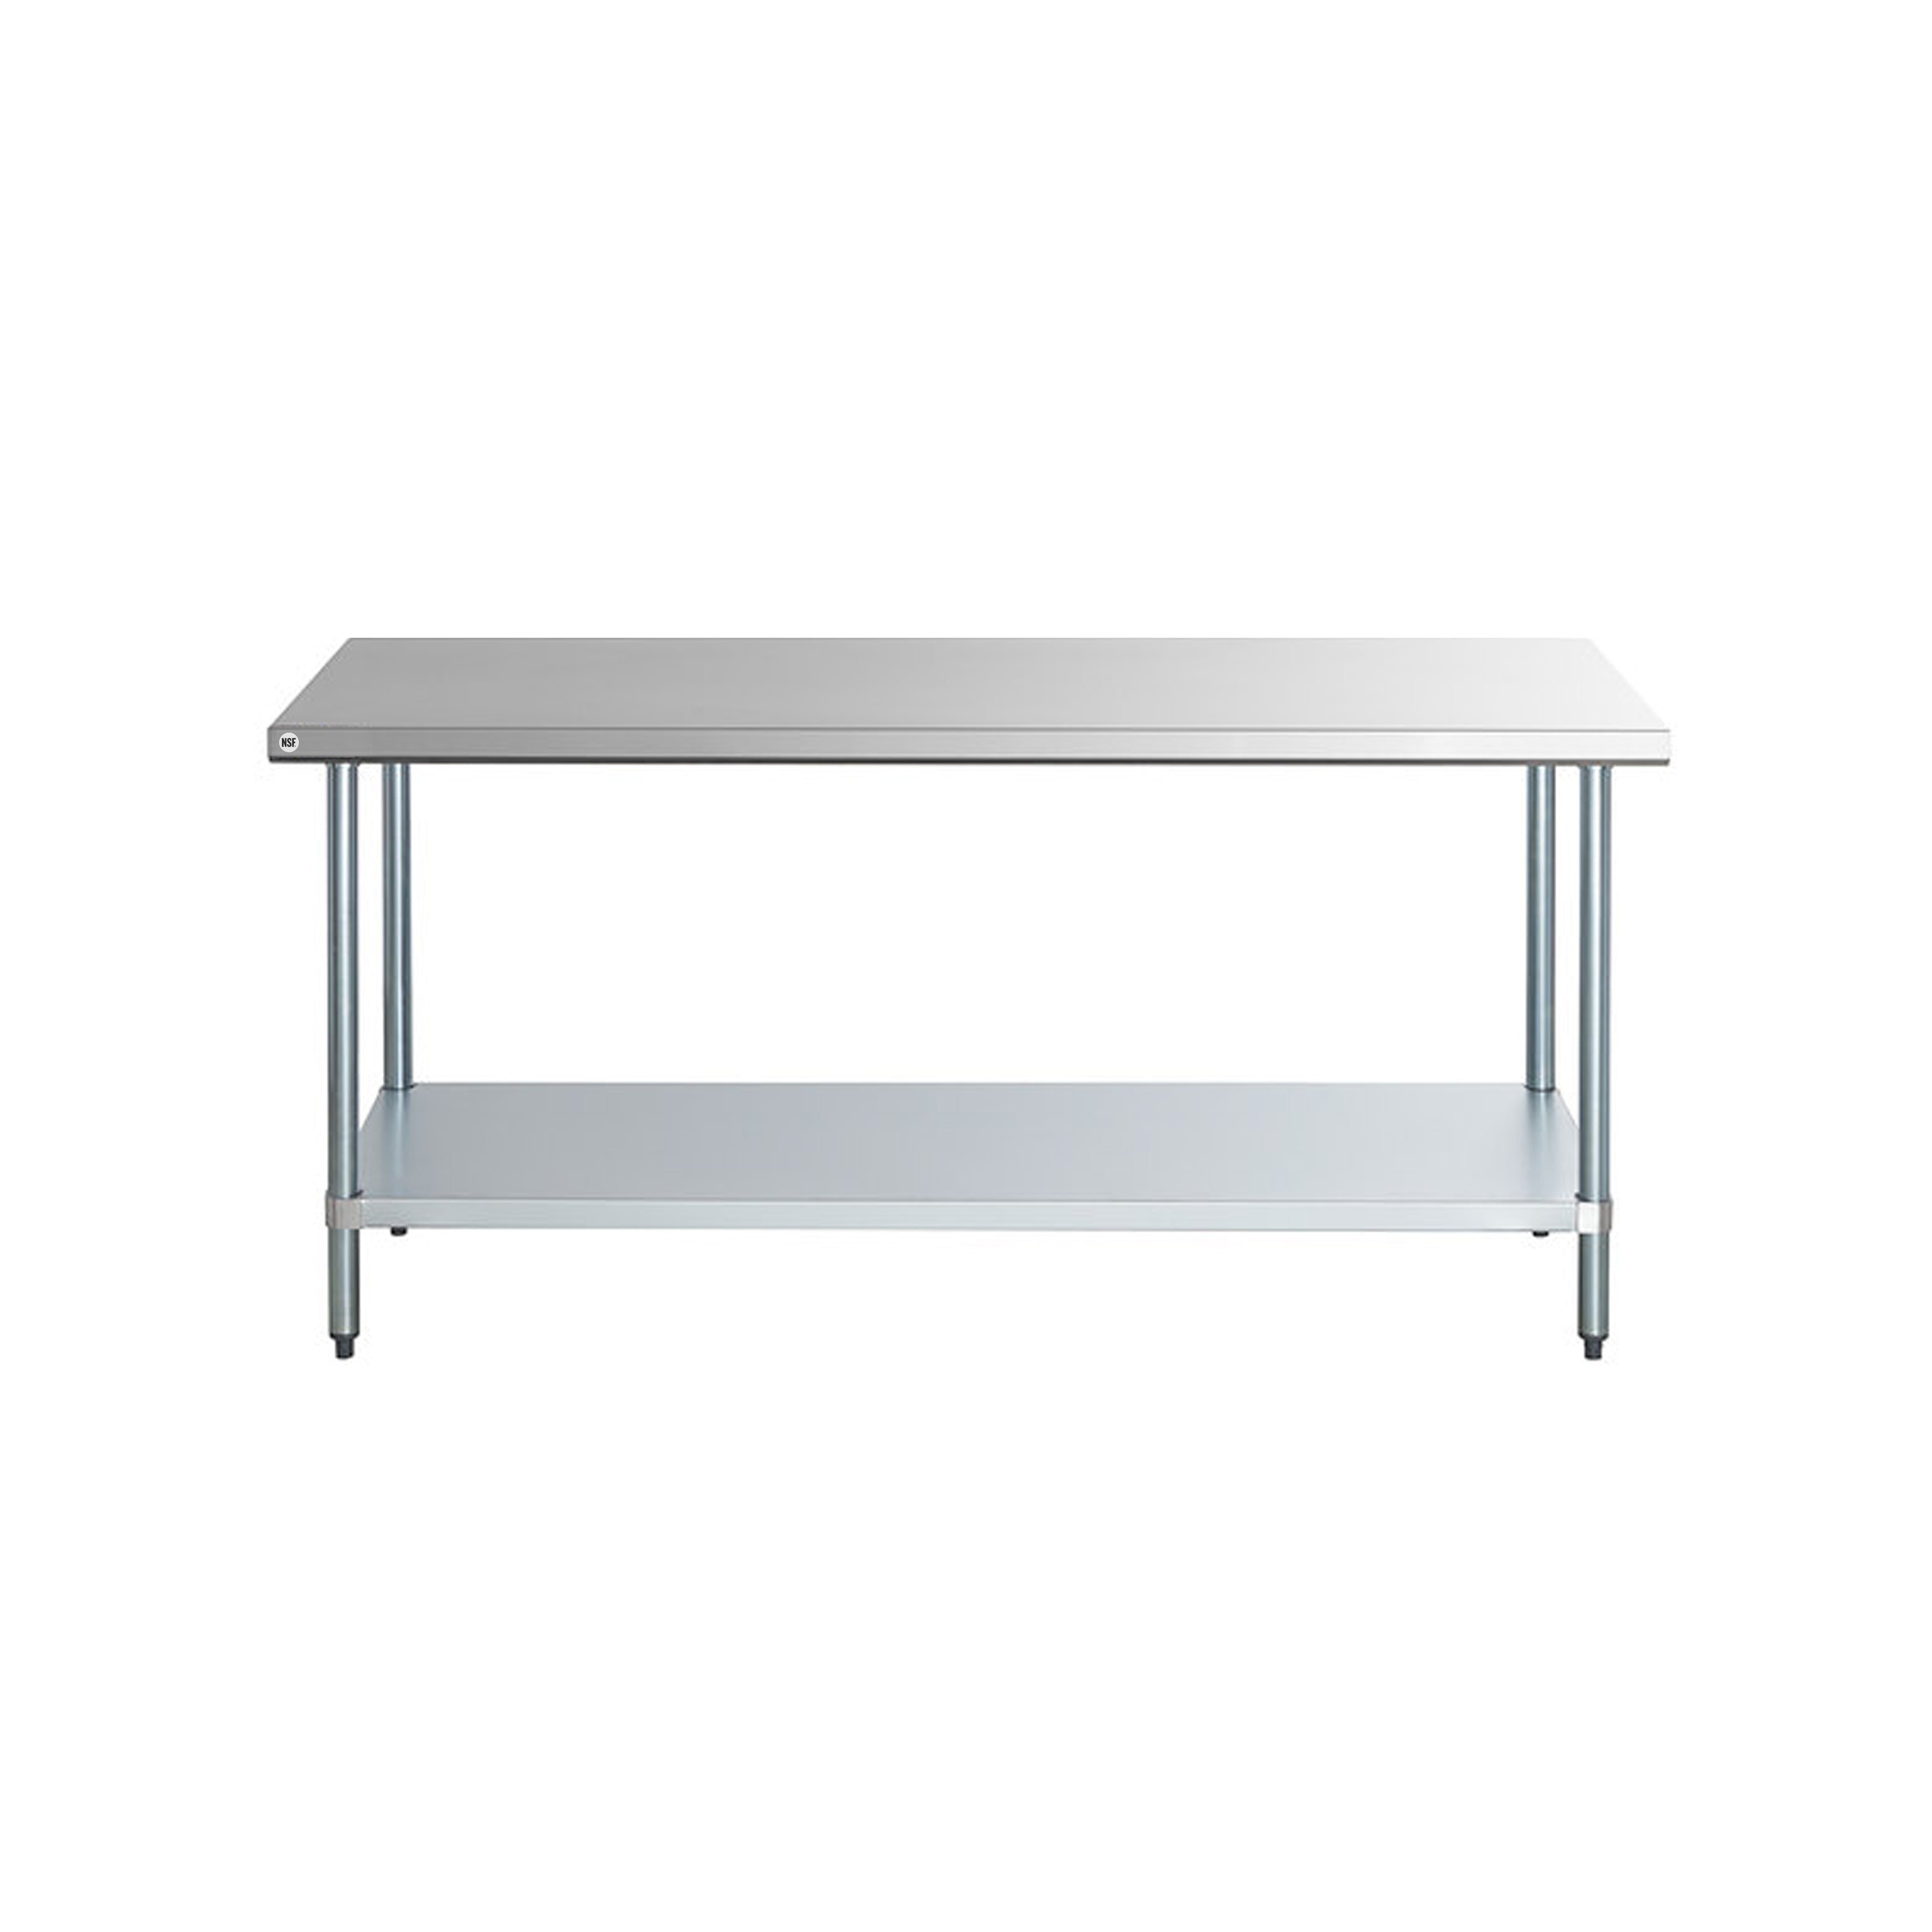 Omcan - 22076, Commercial 30" x 84" Stainless Steel Kitchen Work Table 1600lbs Light Duty